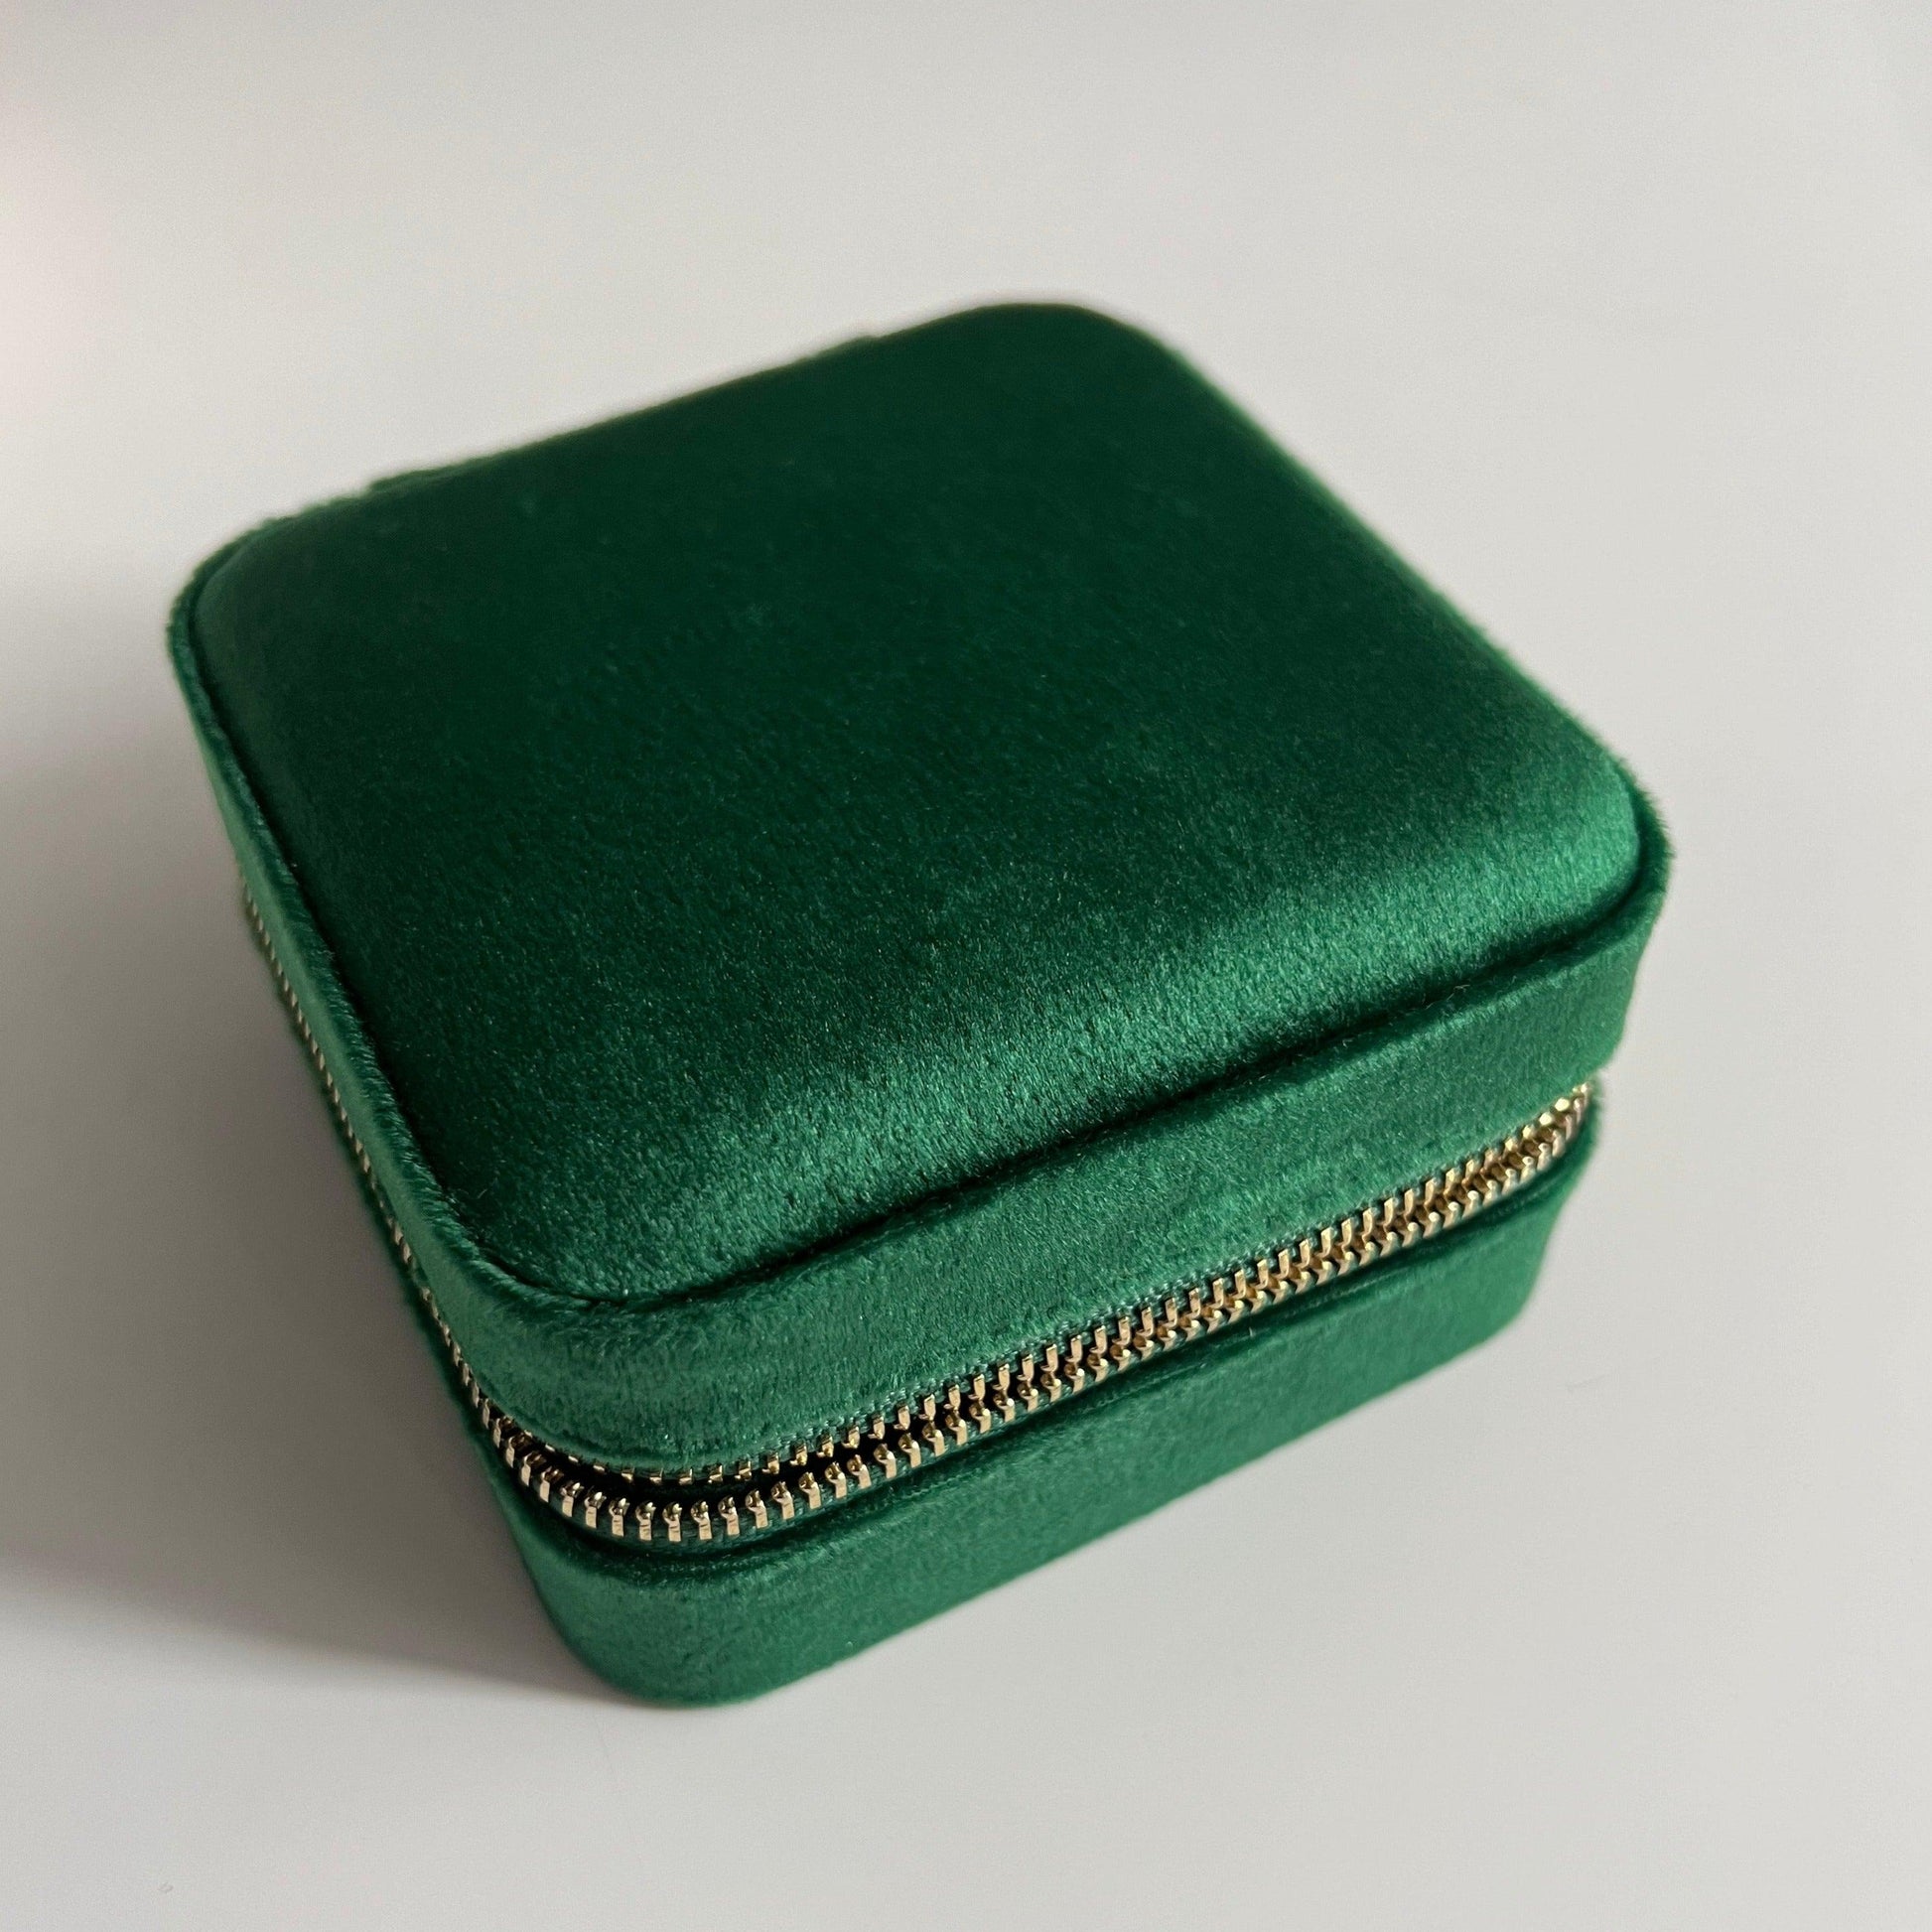 Travel Velvet Jewelry Case - Royal Green - JESSA JEWELRY | GOLD JEWELRY; dainty, affordable gold everyday jewelry. Tarnish free, water-resistant, hypoallergenic. Jewelry for everyday wear